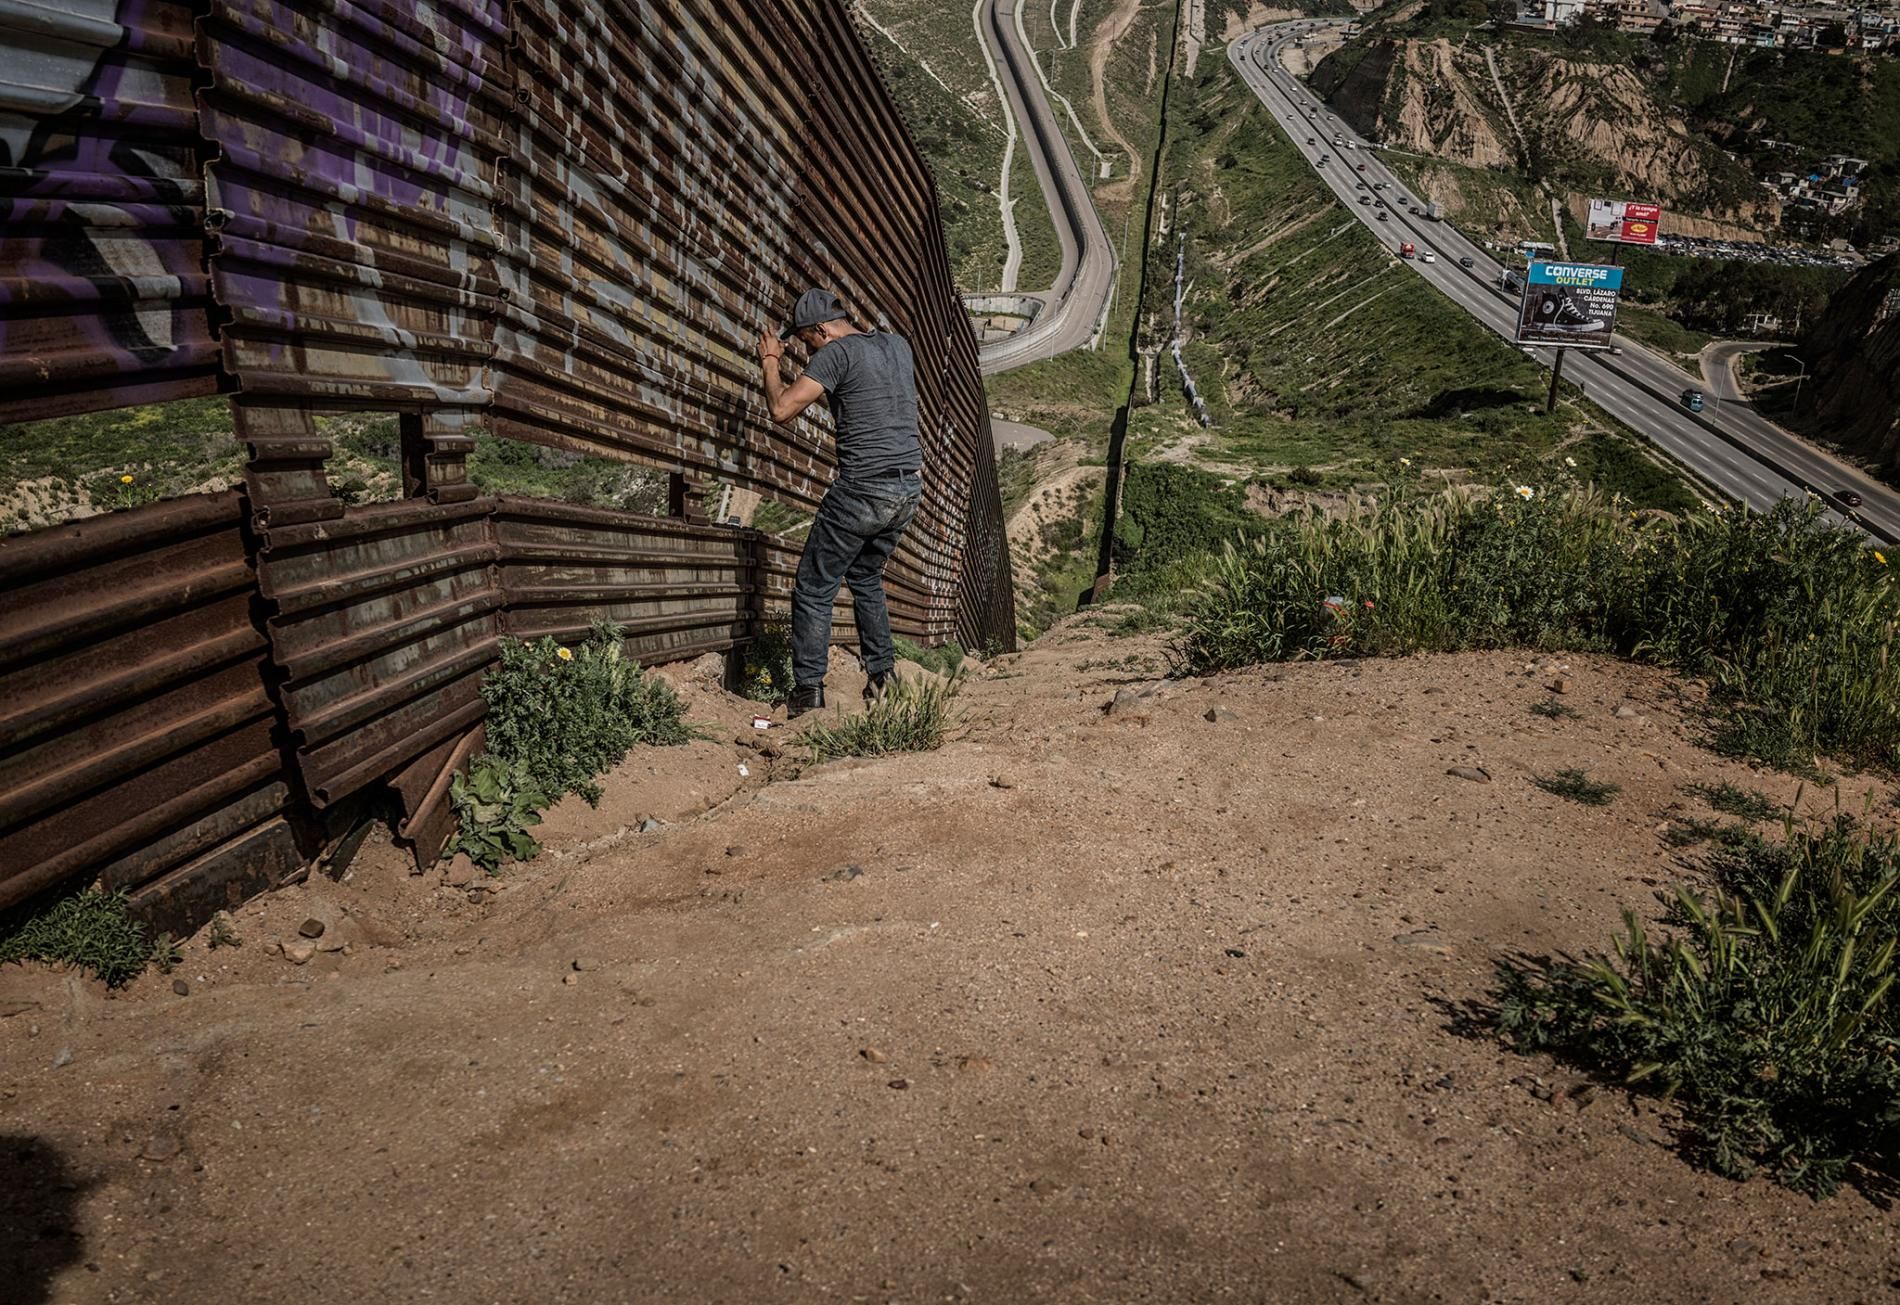  A man, likely a human trafficker known as a "coyote," studies a vulnerable stretch of border wall in Tijuana. There is a gap in one area of wall, offering an opening to traffickers of people and drugs. Image by James Whitlow Delano. Mexico, 2017.